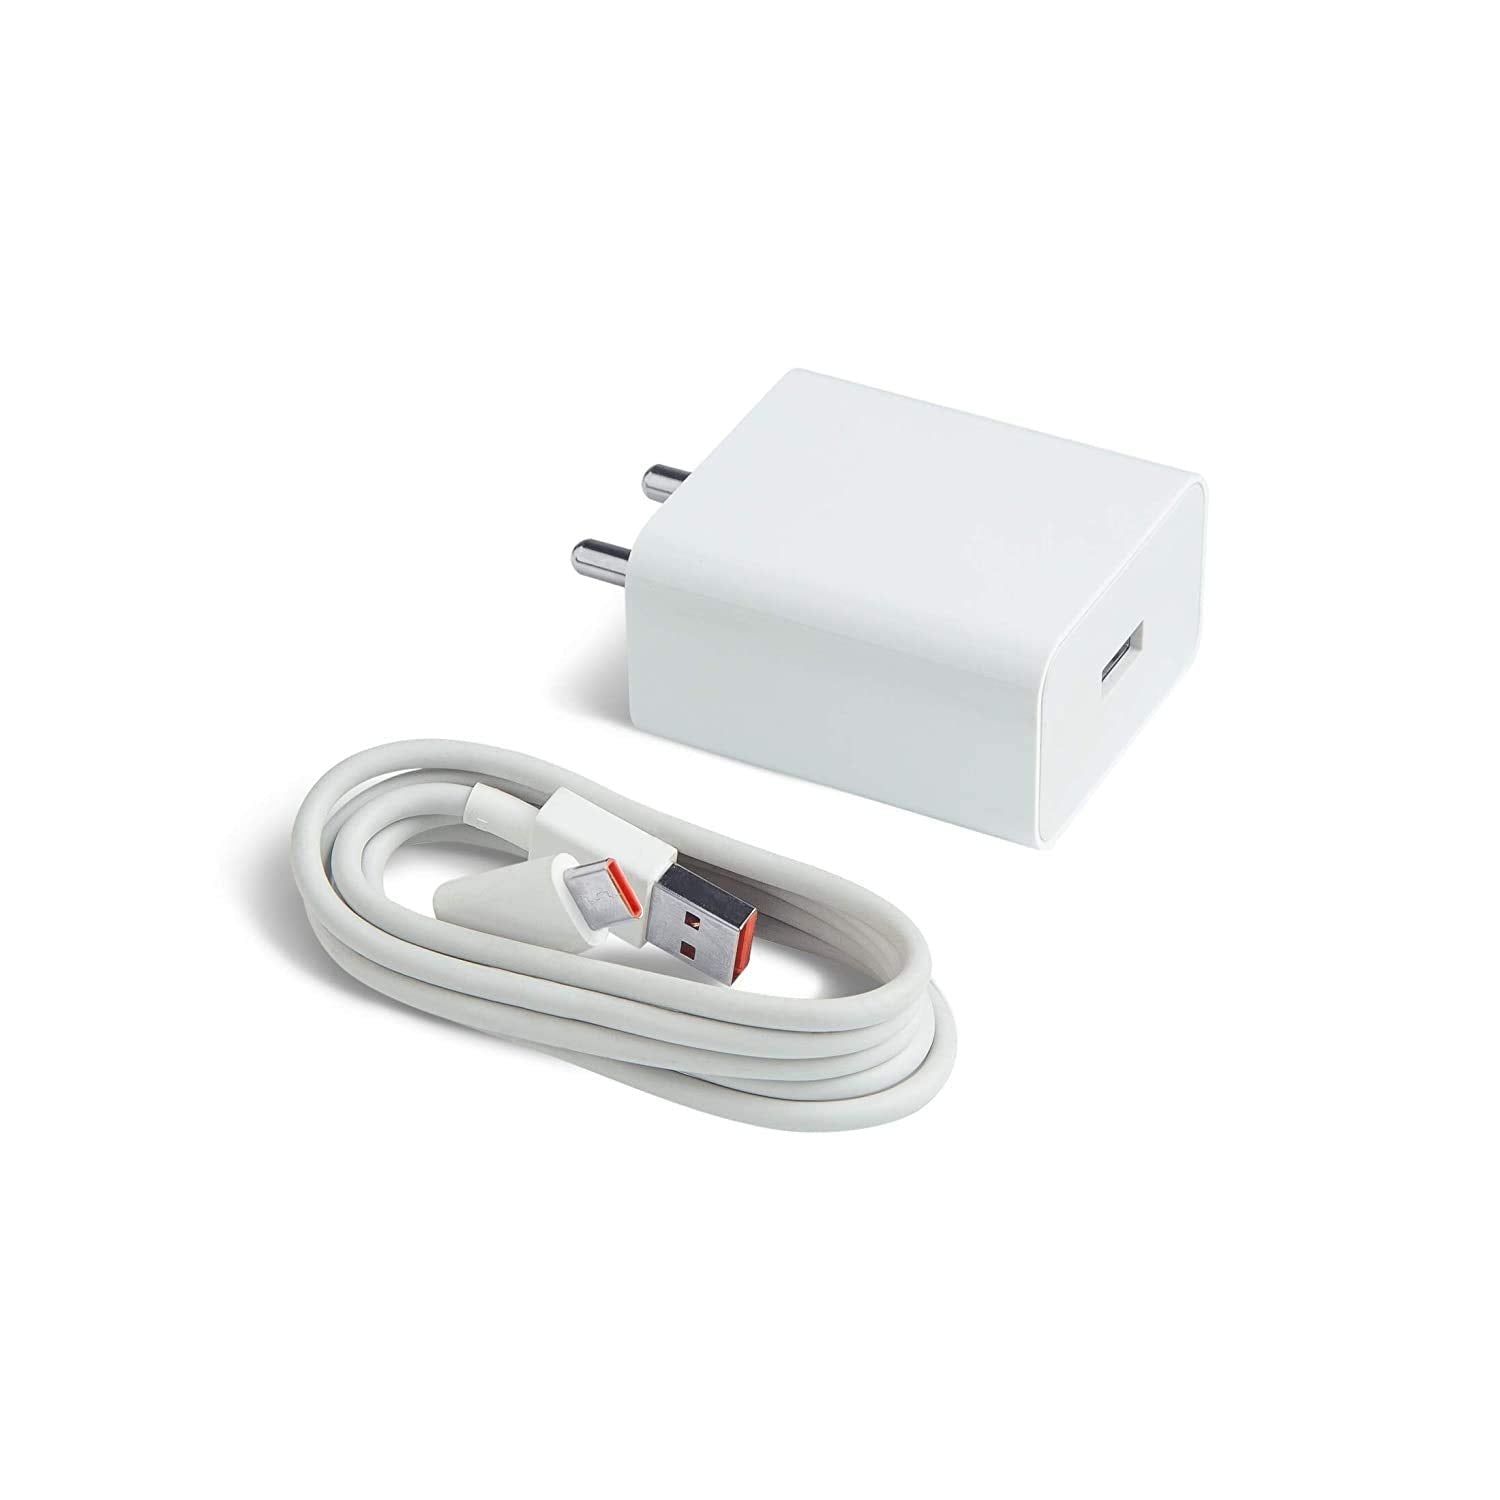 XIAOMI Redmi (MI) Note 10S Superfast 33W Support SonicCharge 2.0 Charger With Type-C Cable